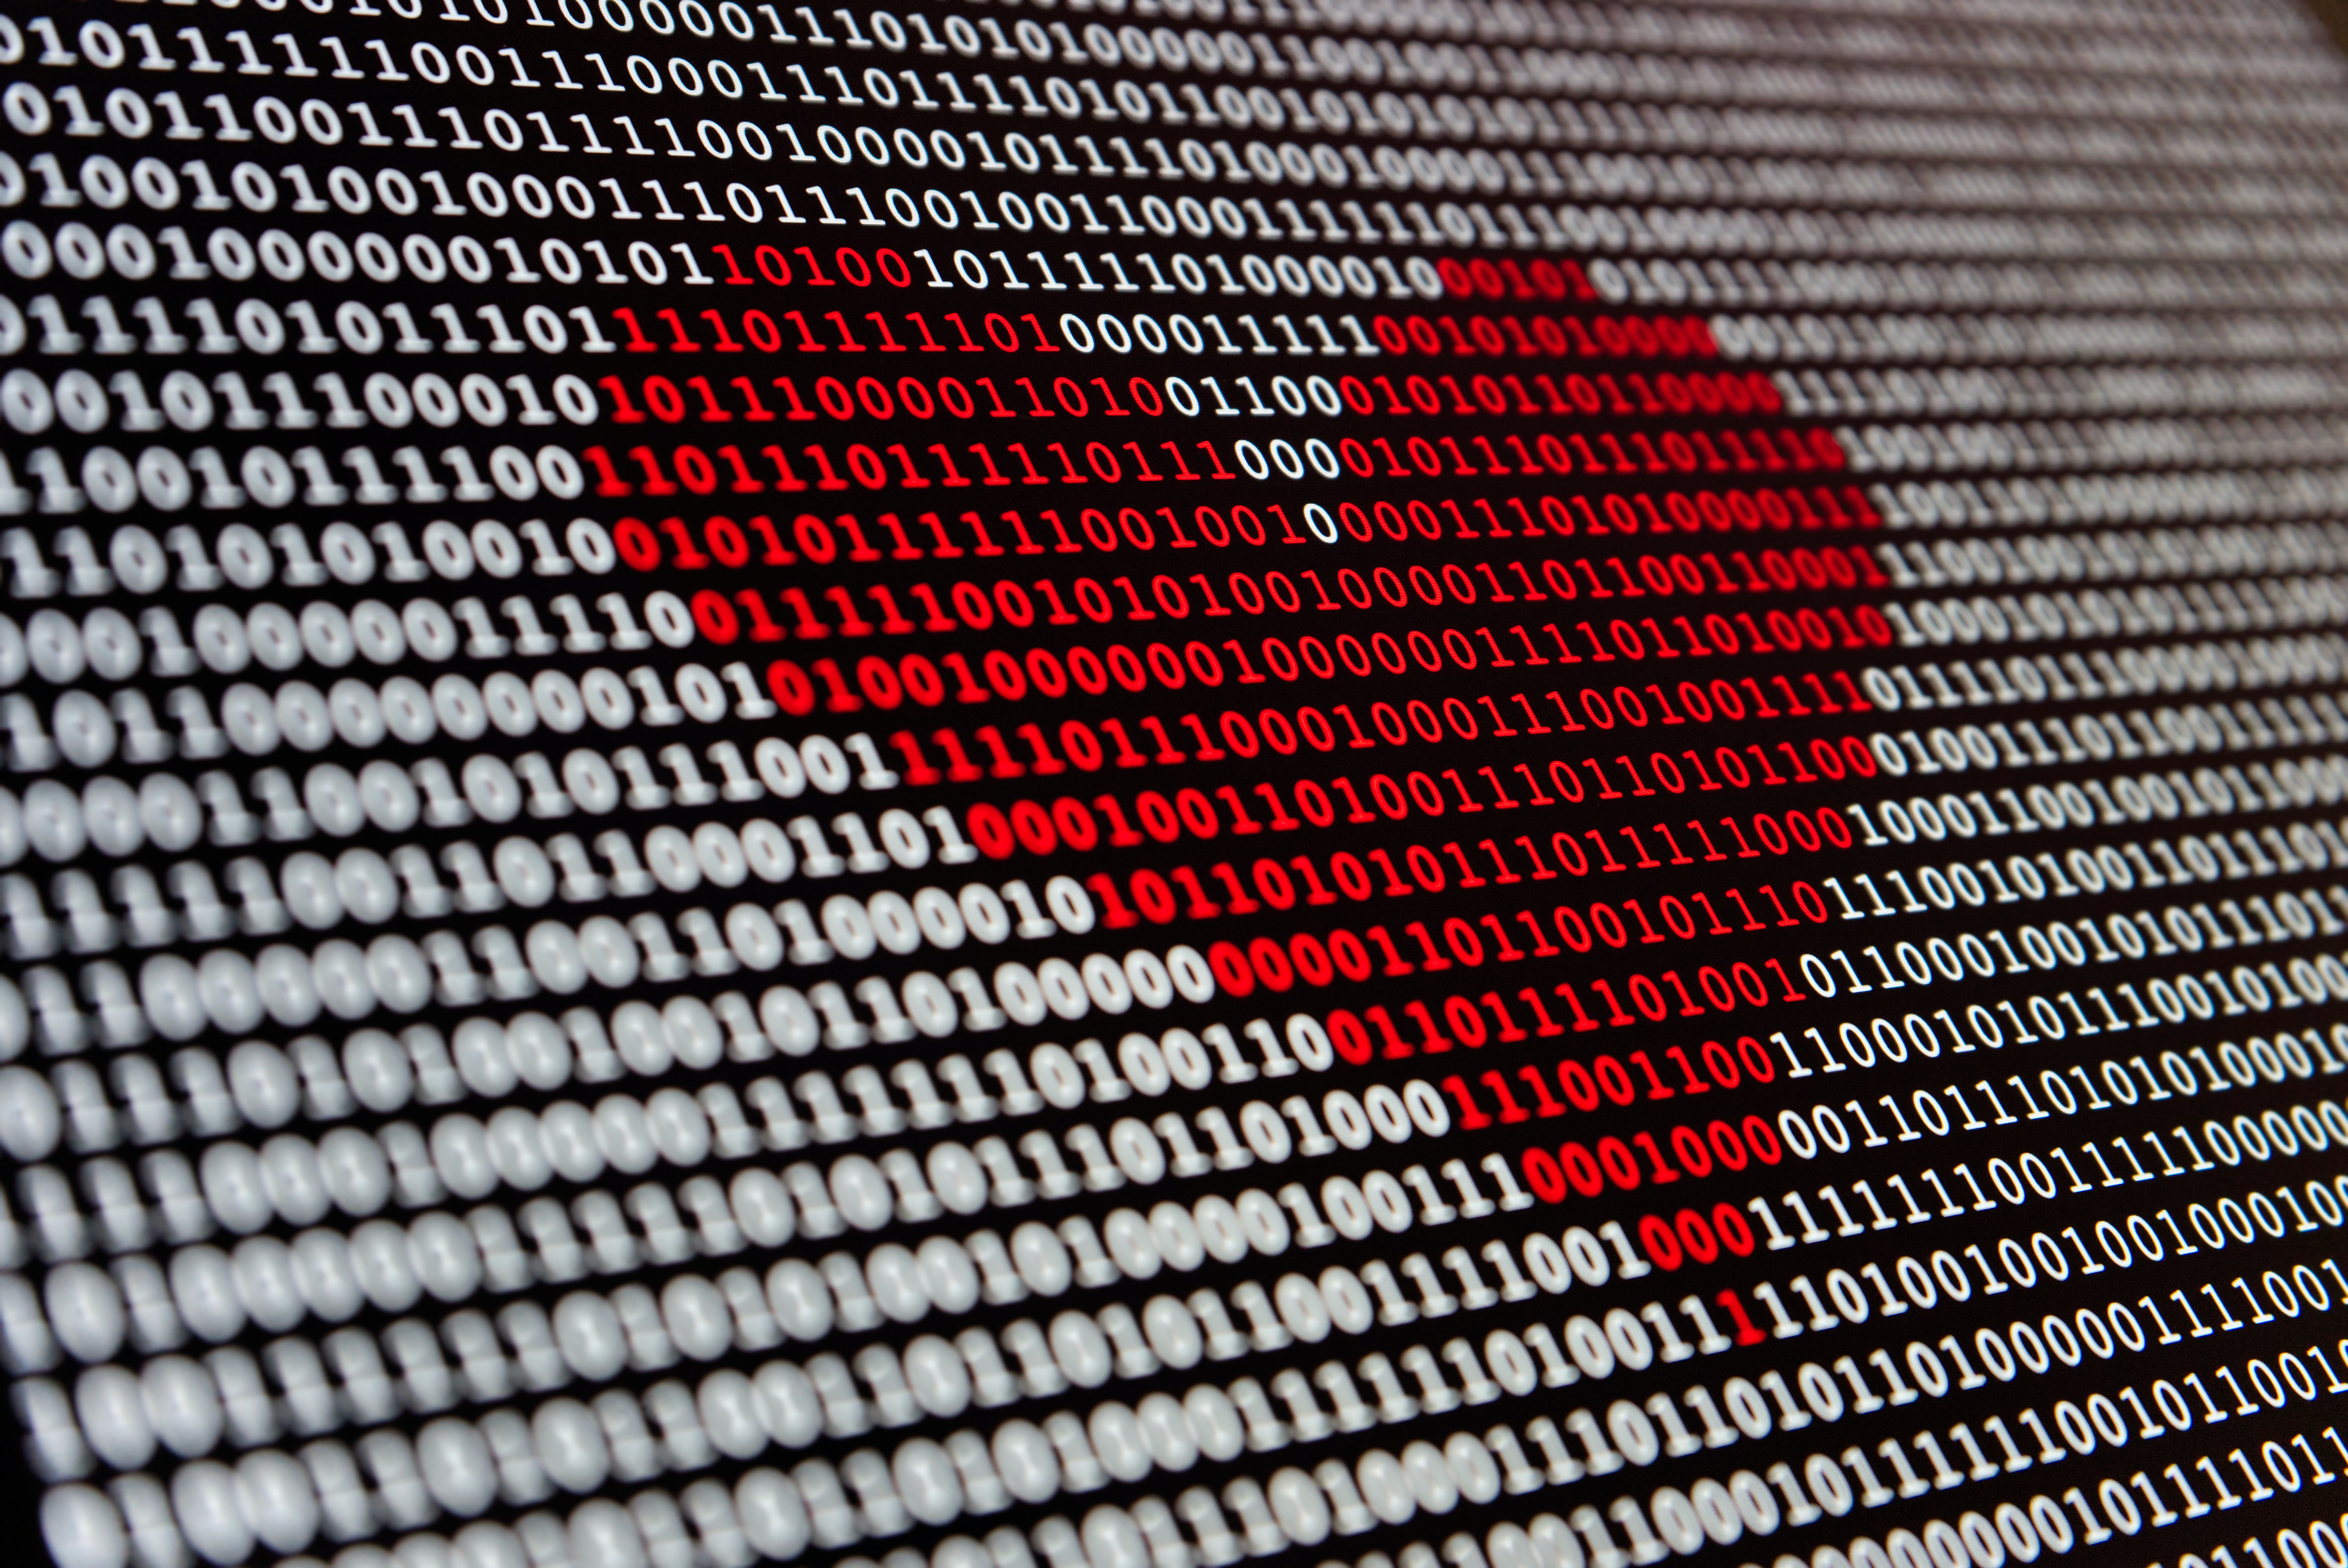 Learn to love your data